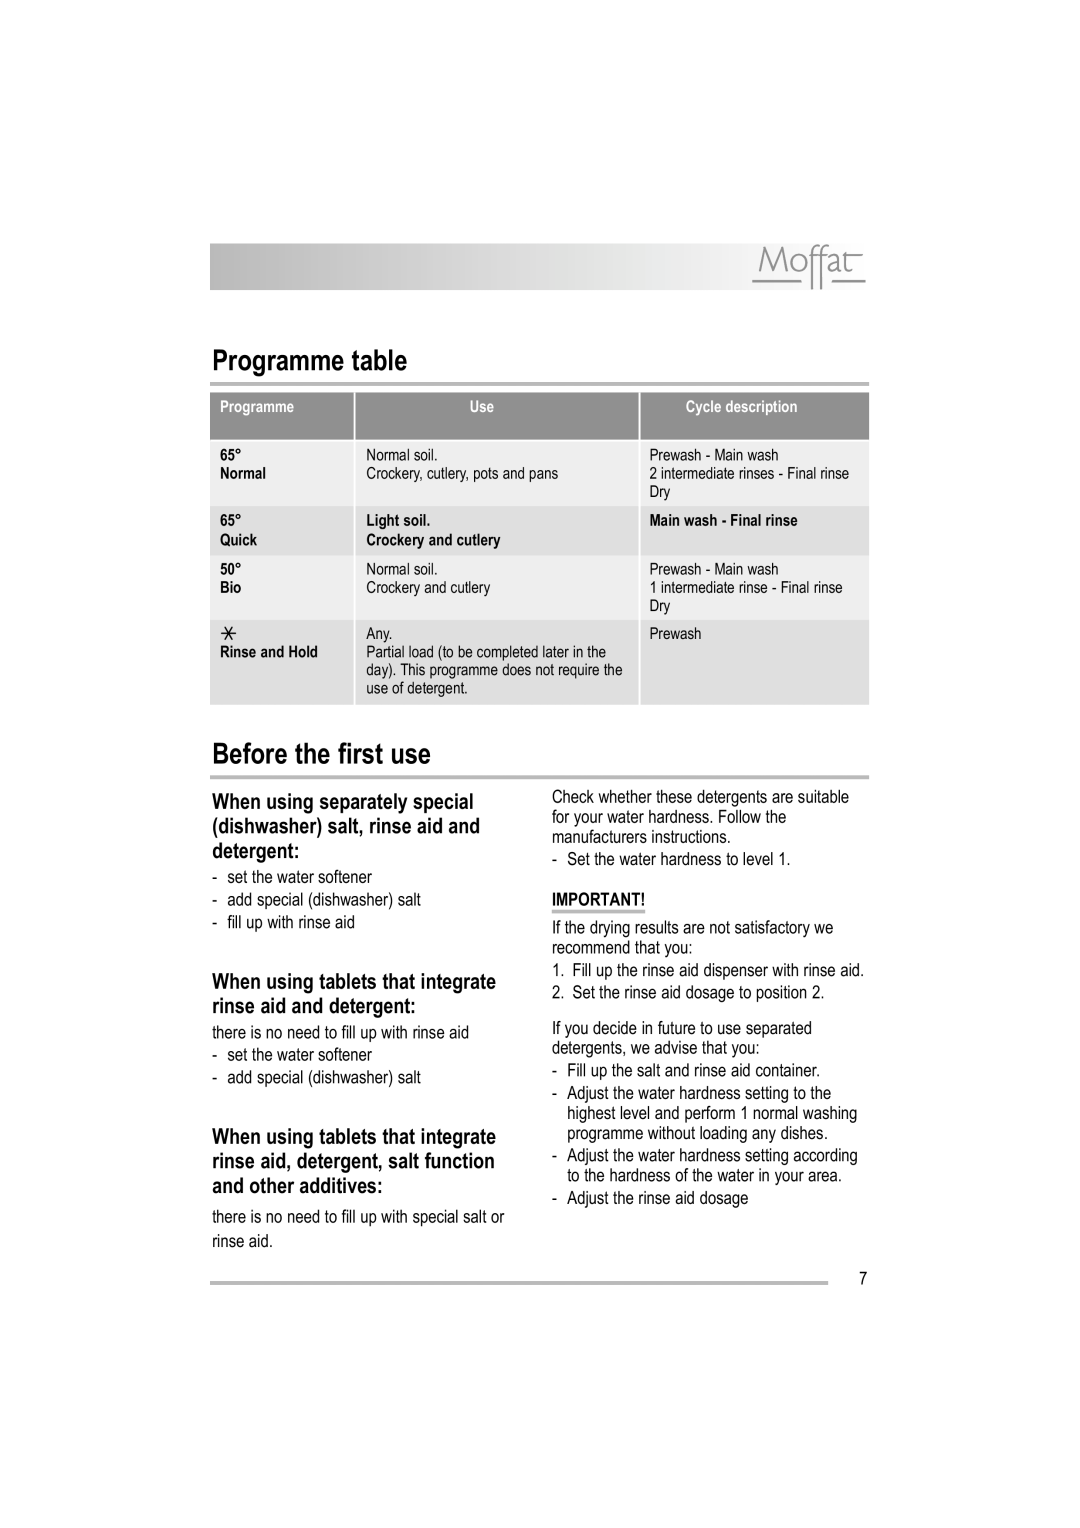 Moffat MDW 542 user manual Programme table, Before the first use, When using tablets that integrate rinse aid and detergent 